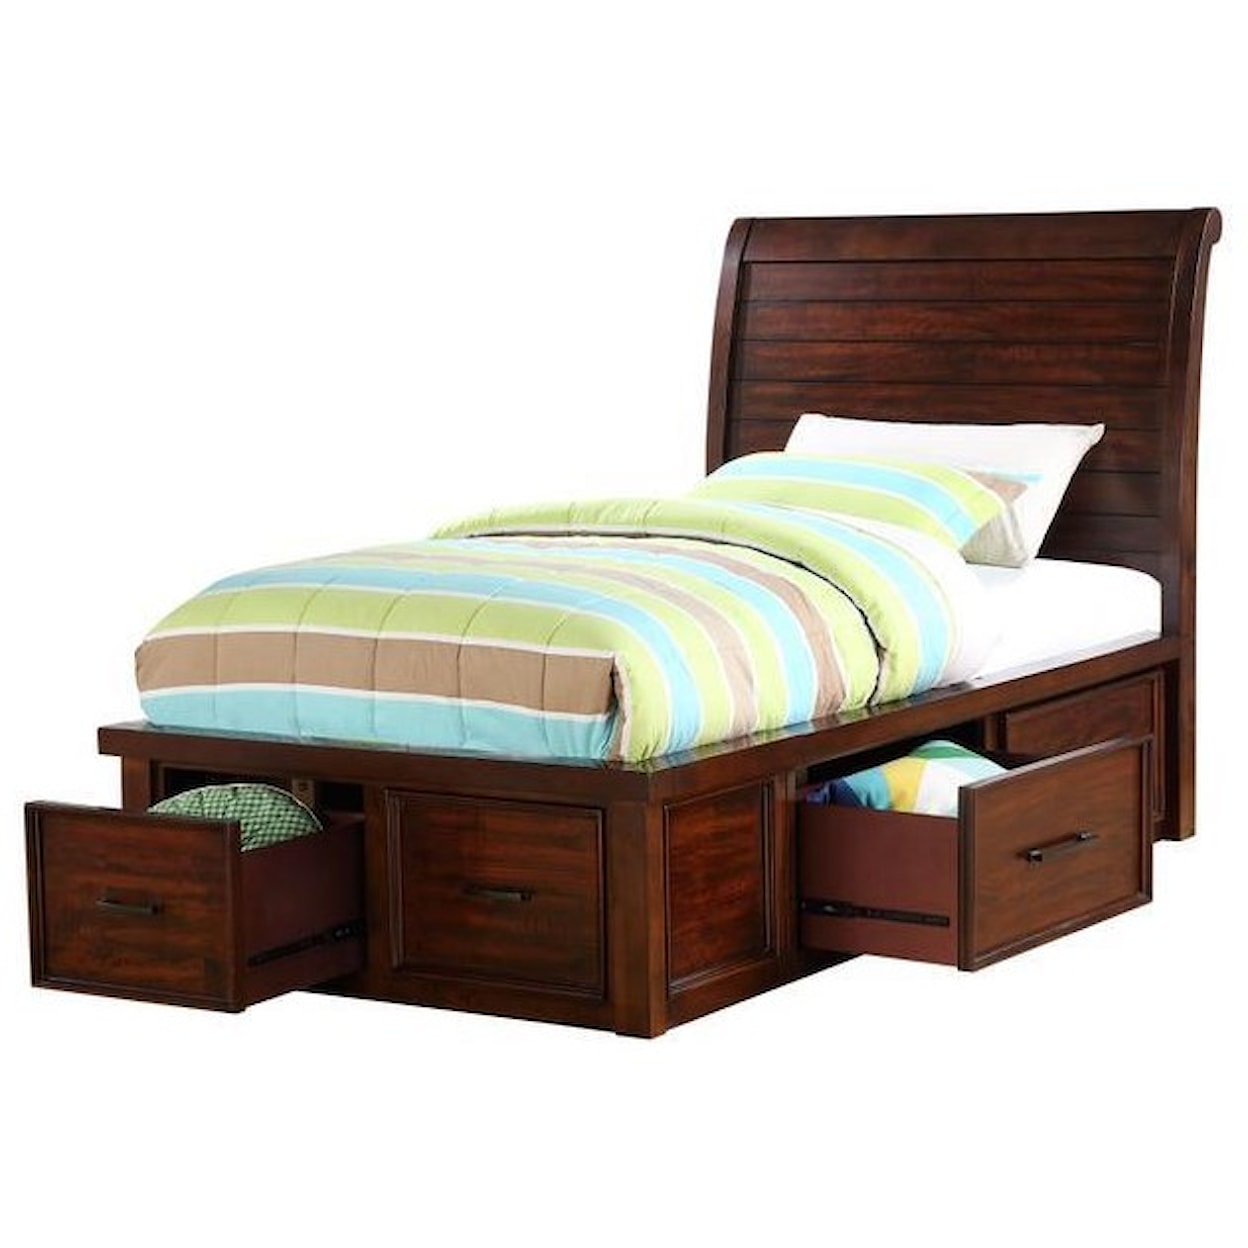 HH HAYWARD TWIN SLEIGH BED WITH STORAGE WITH DRAWERS